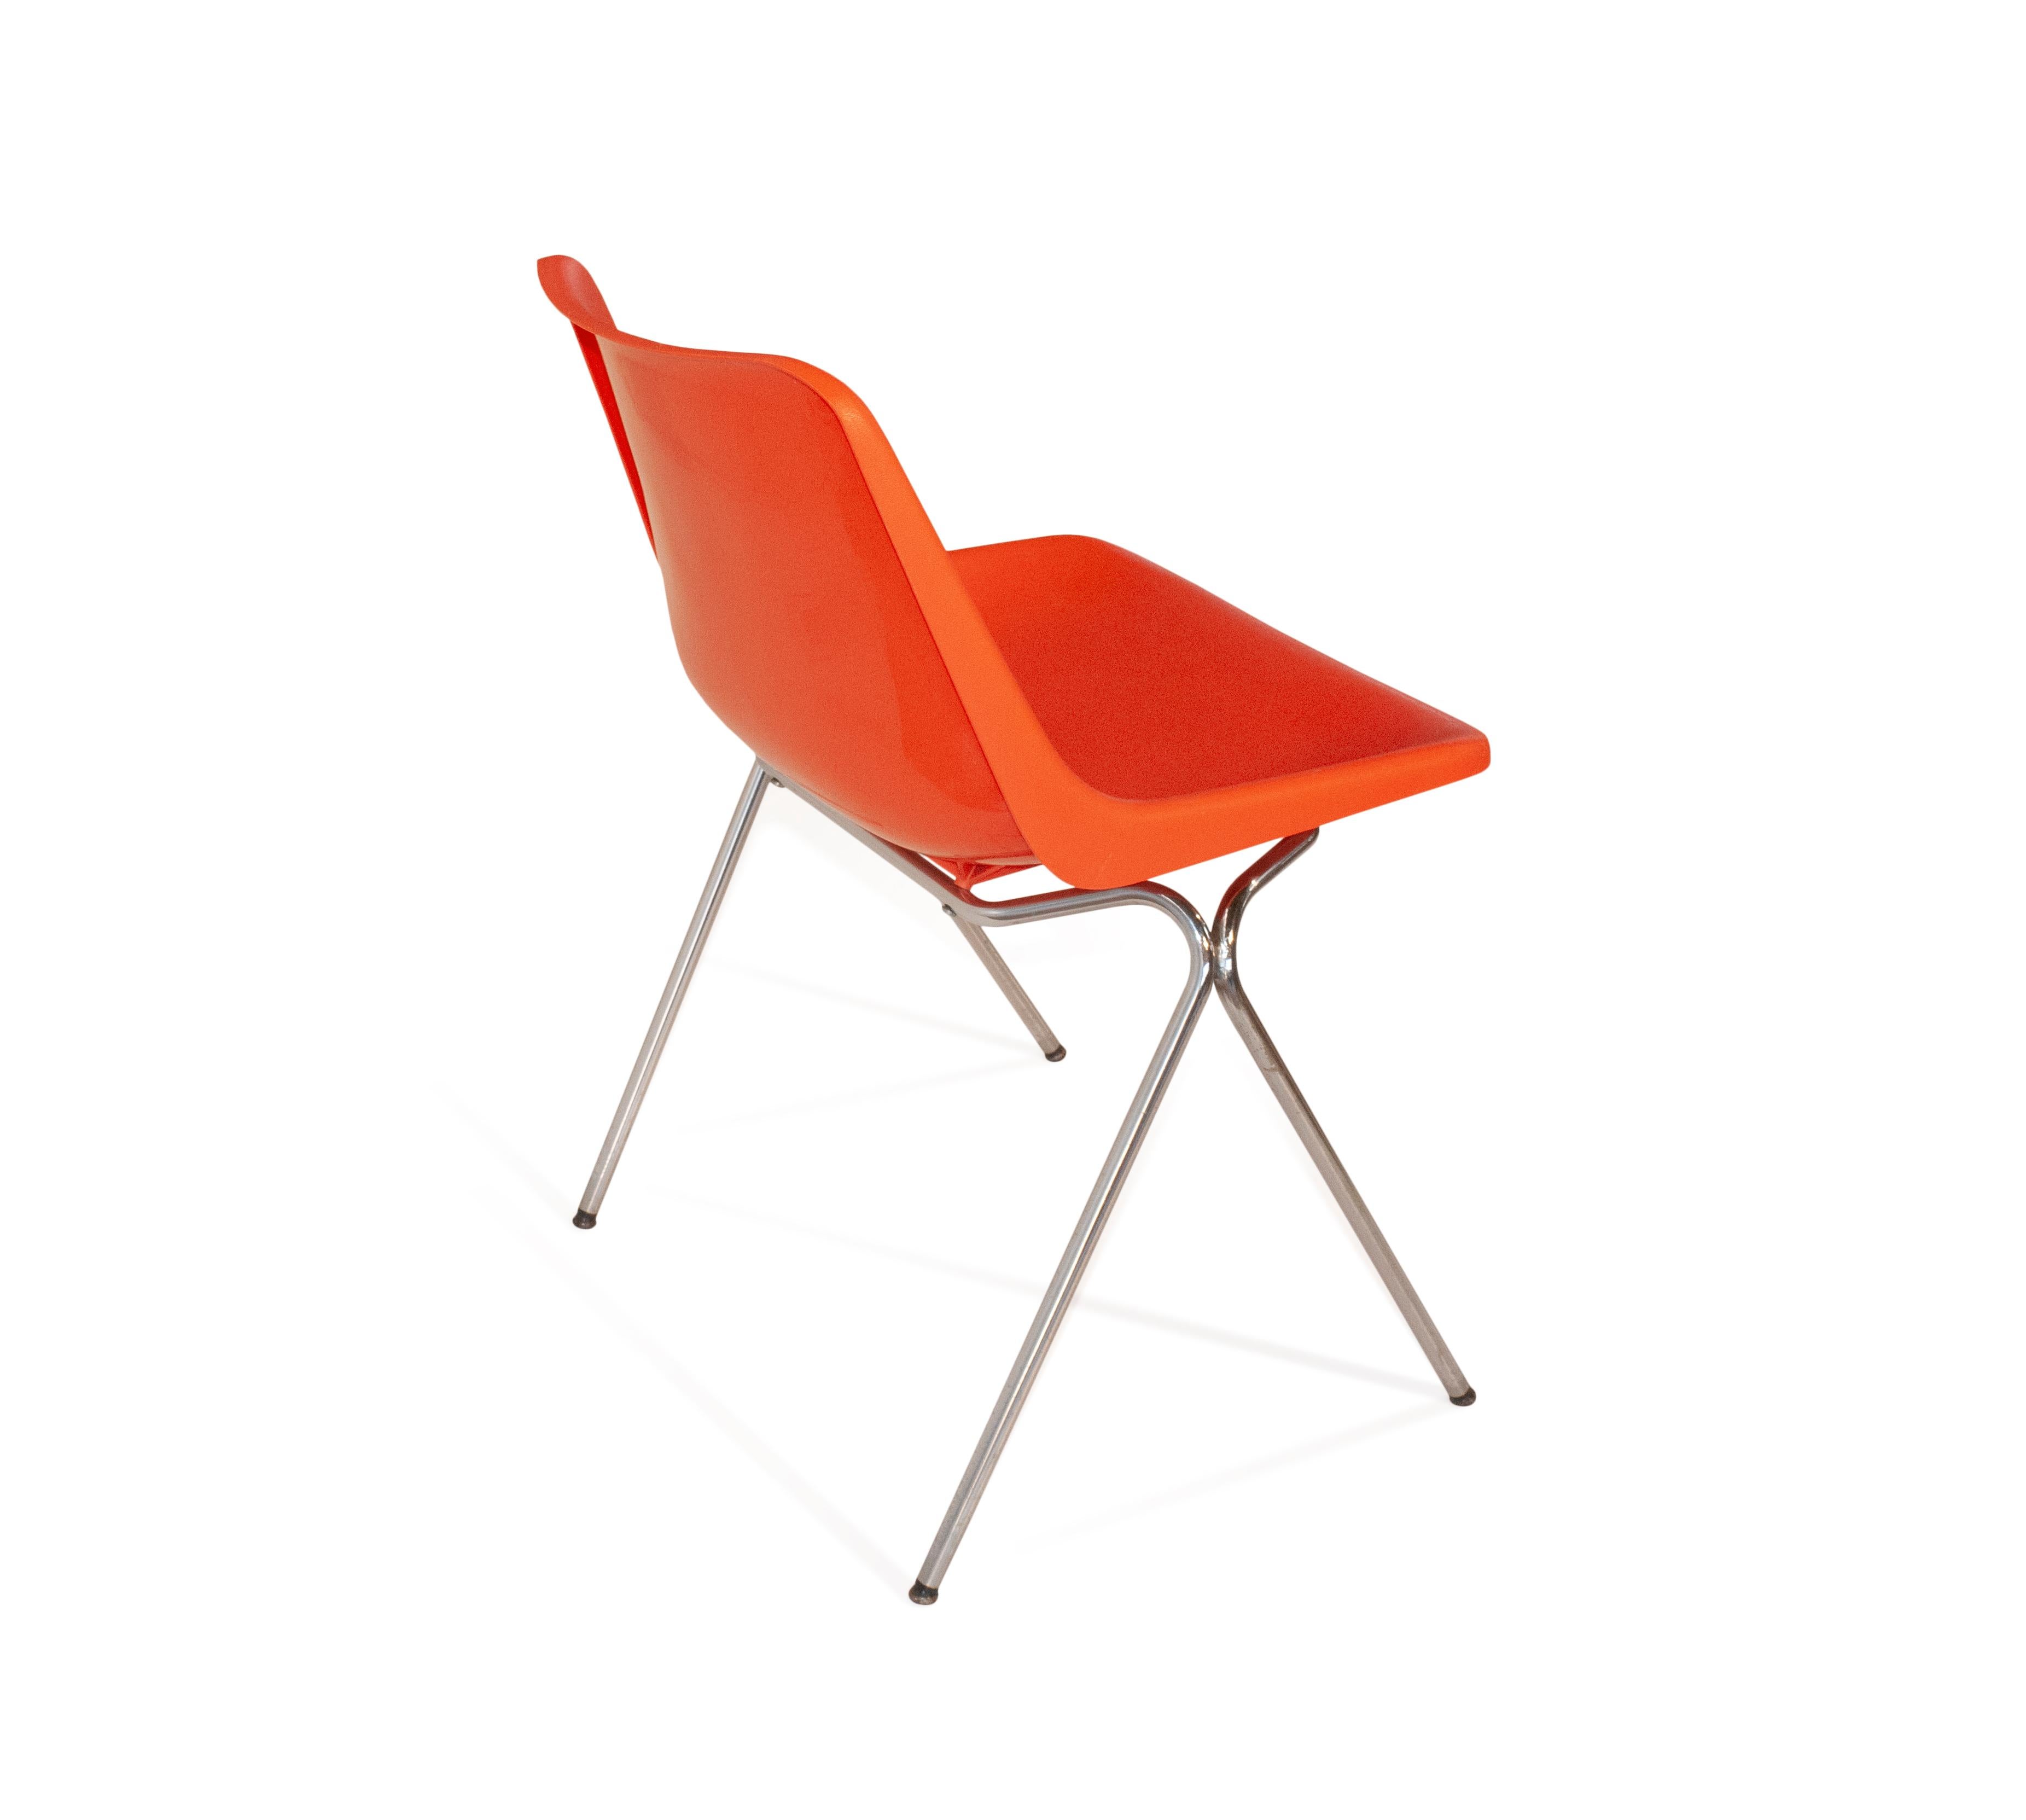 Brazilian Robin Day - HILLE Chair by L´atelier, Brazil, 1970s - very rare For Sale